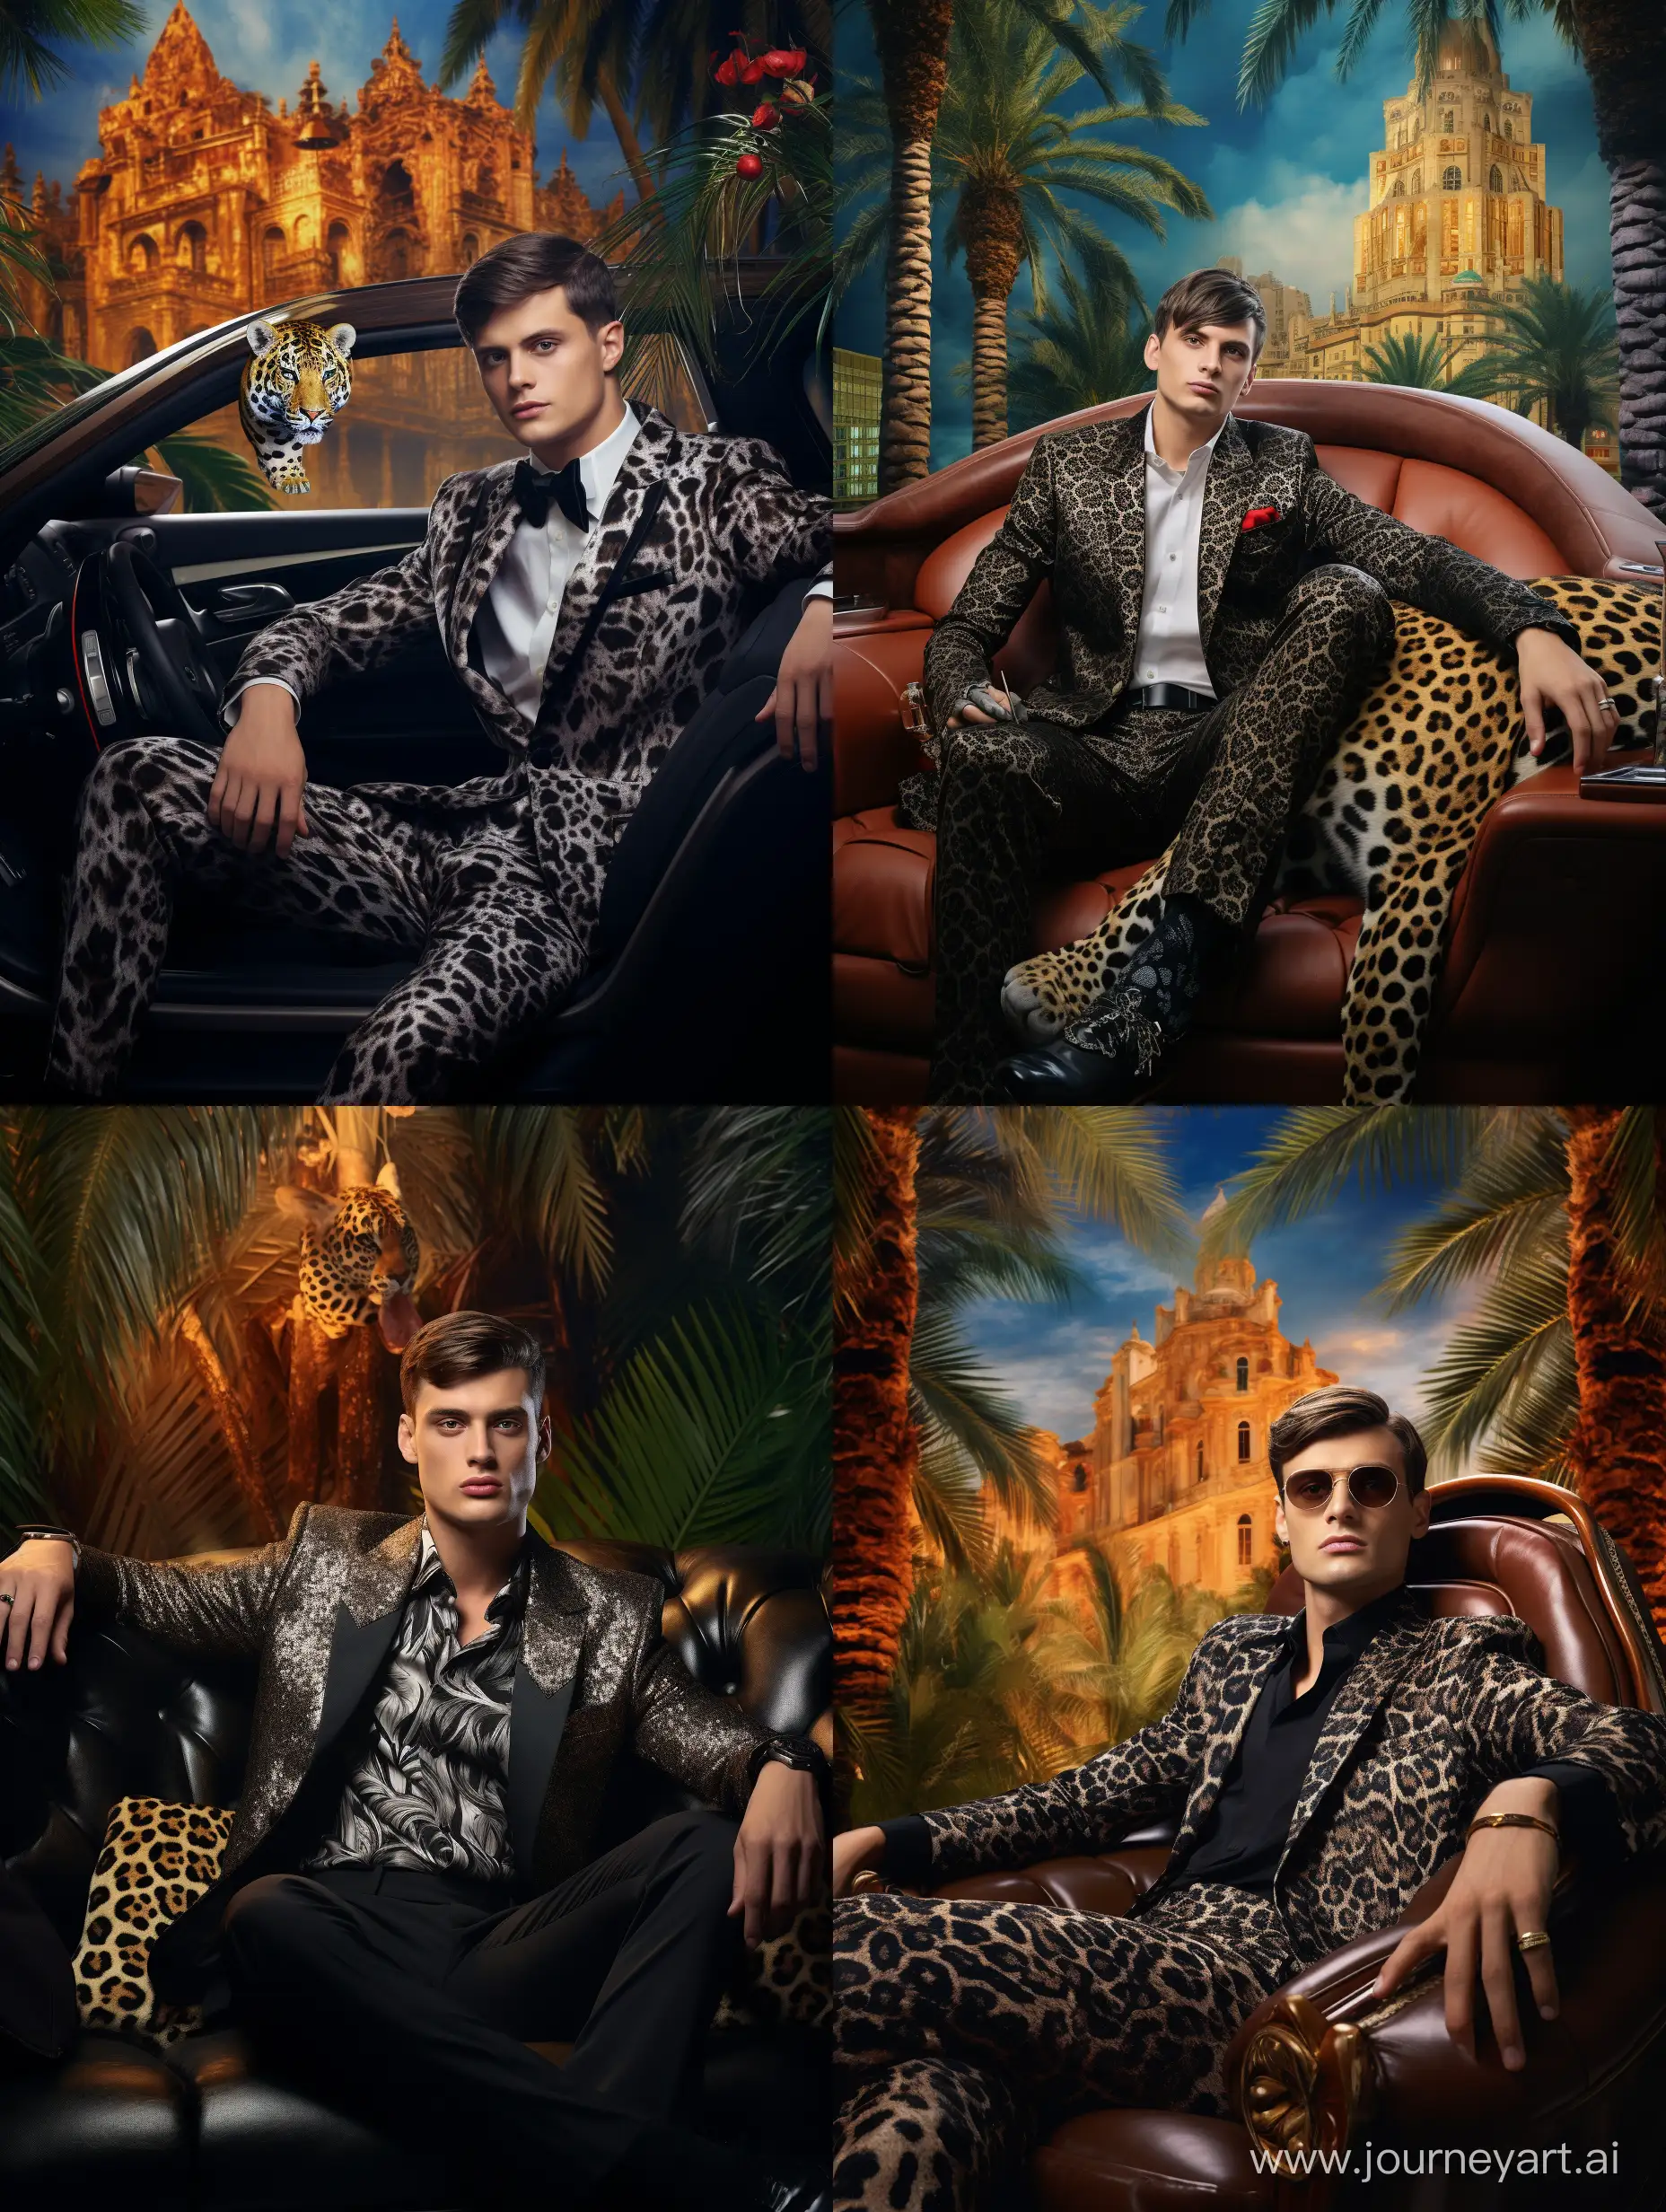 Fashionable-Russian-Man-in-Leopard-Suit-Poses-in-Expensive-Black-Bentley-at-Monaco-Mansion